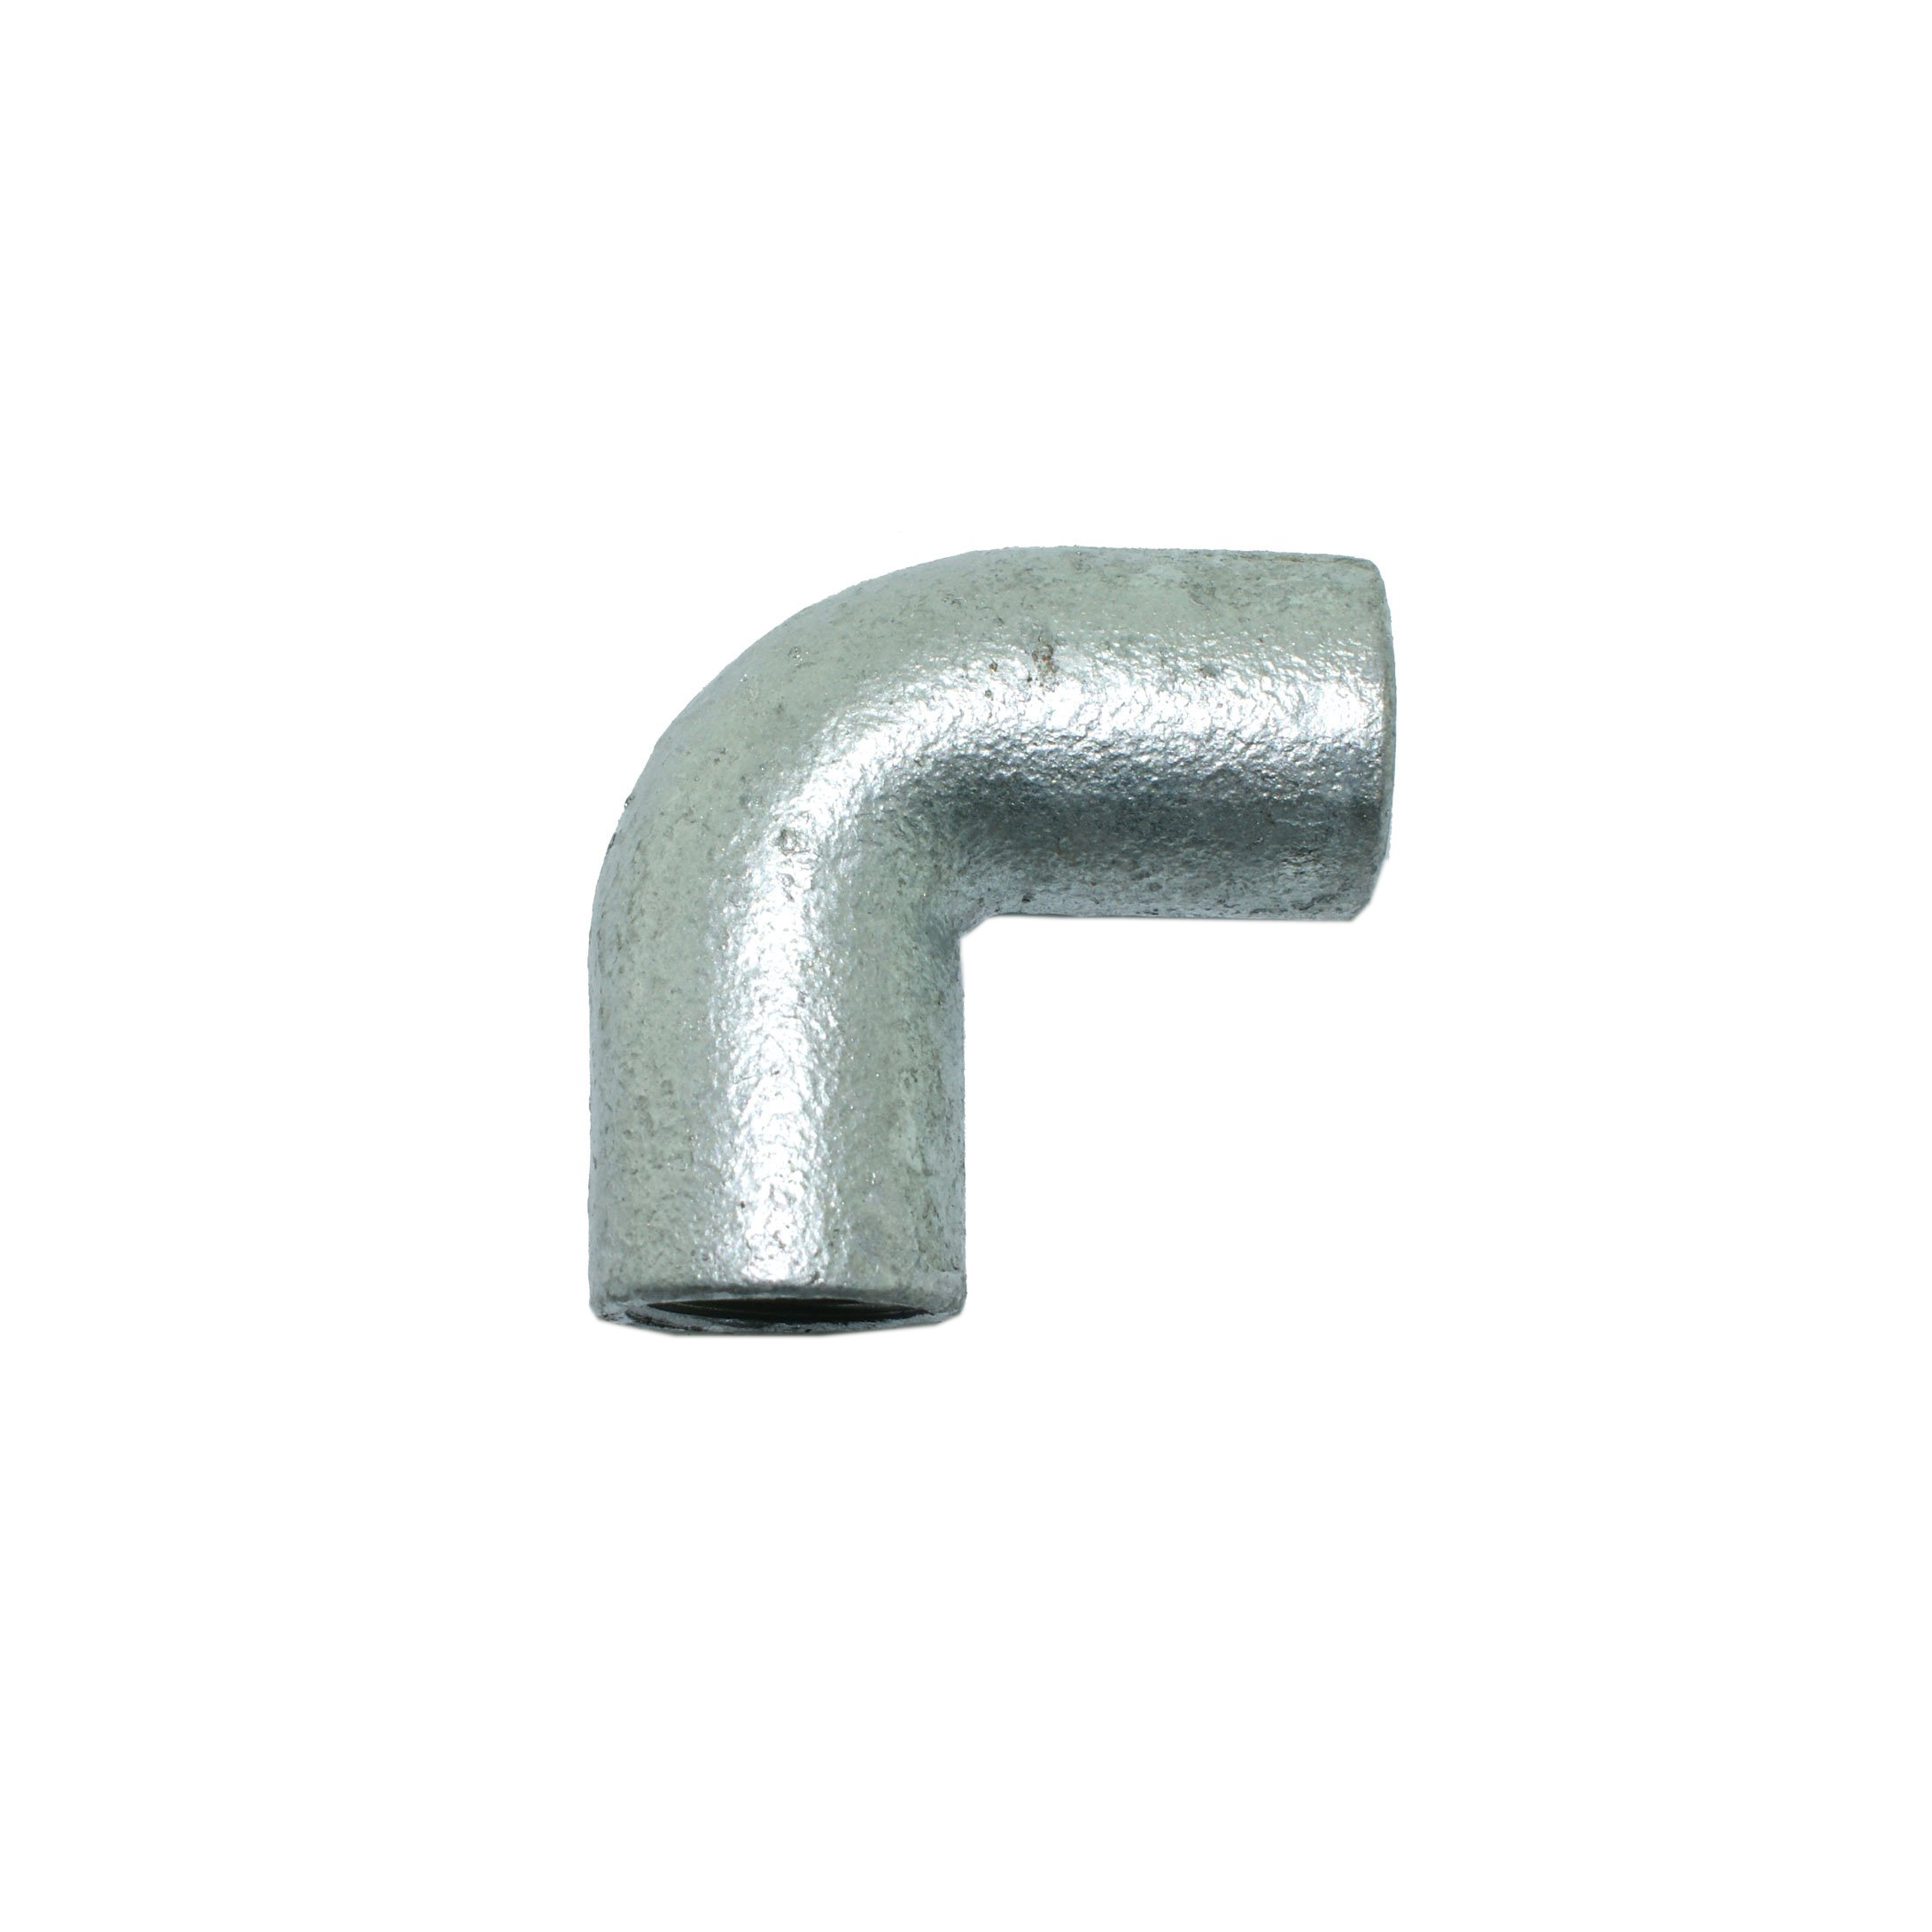 BS Malleable Iron Solid Bends